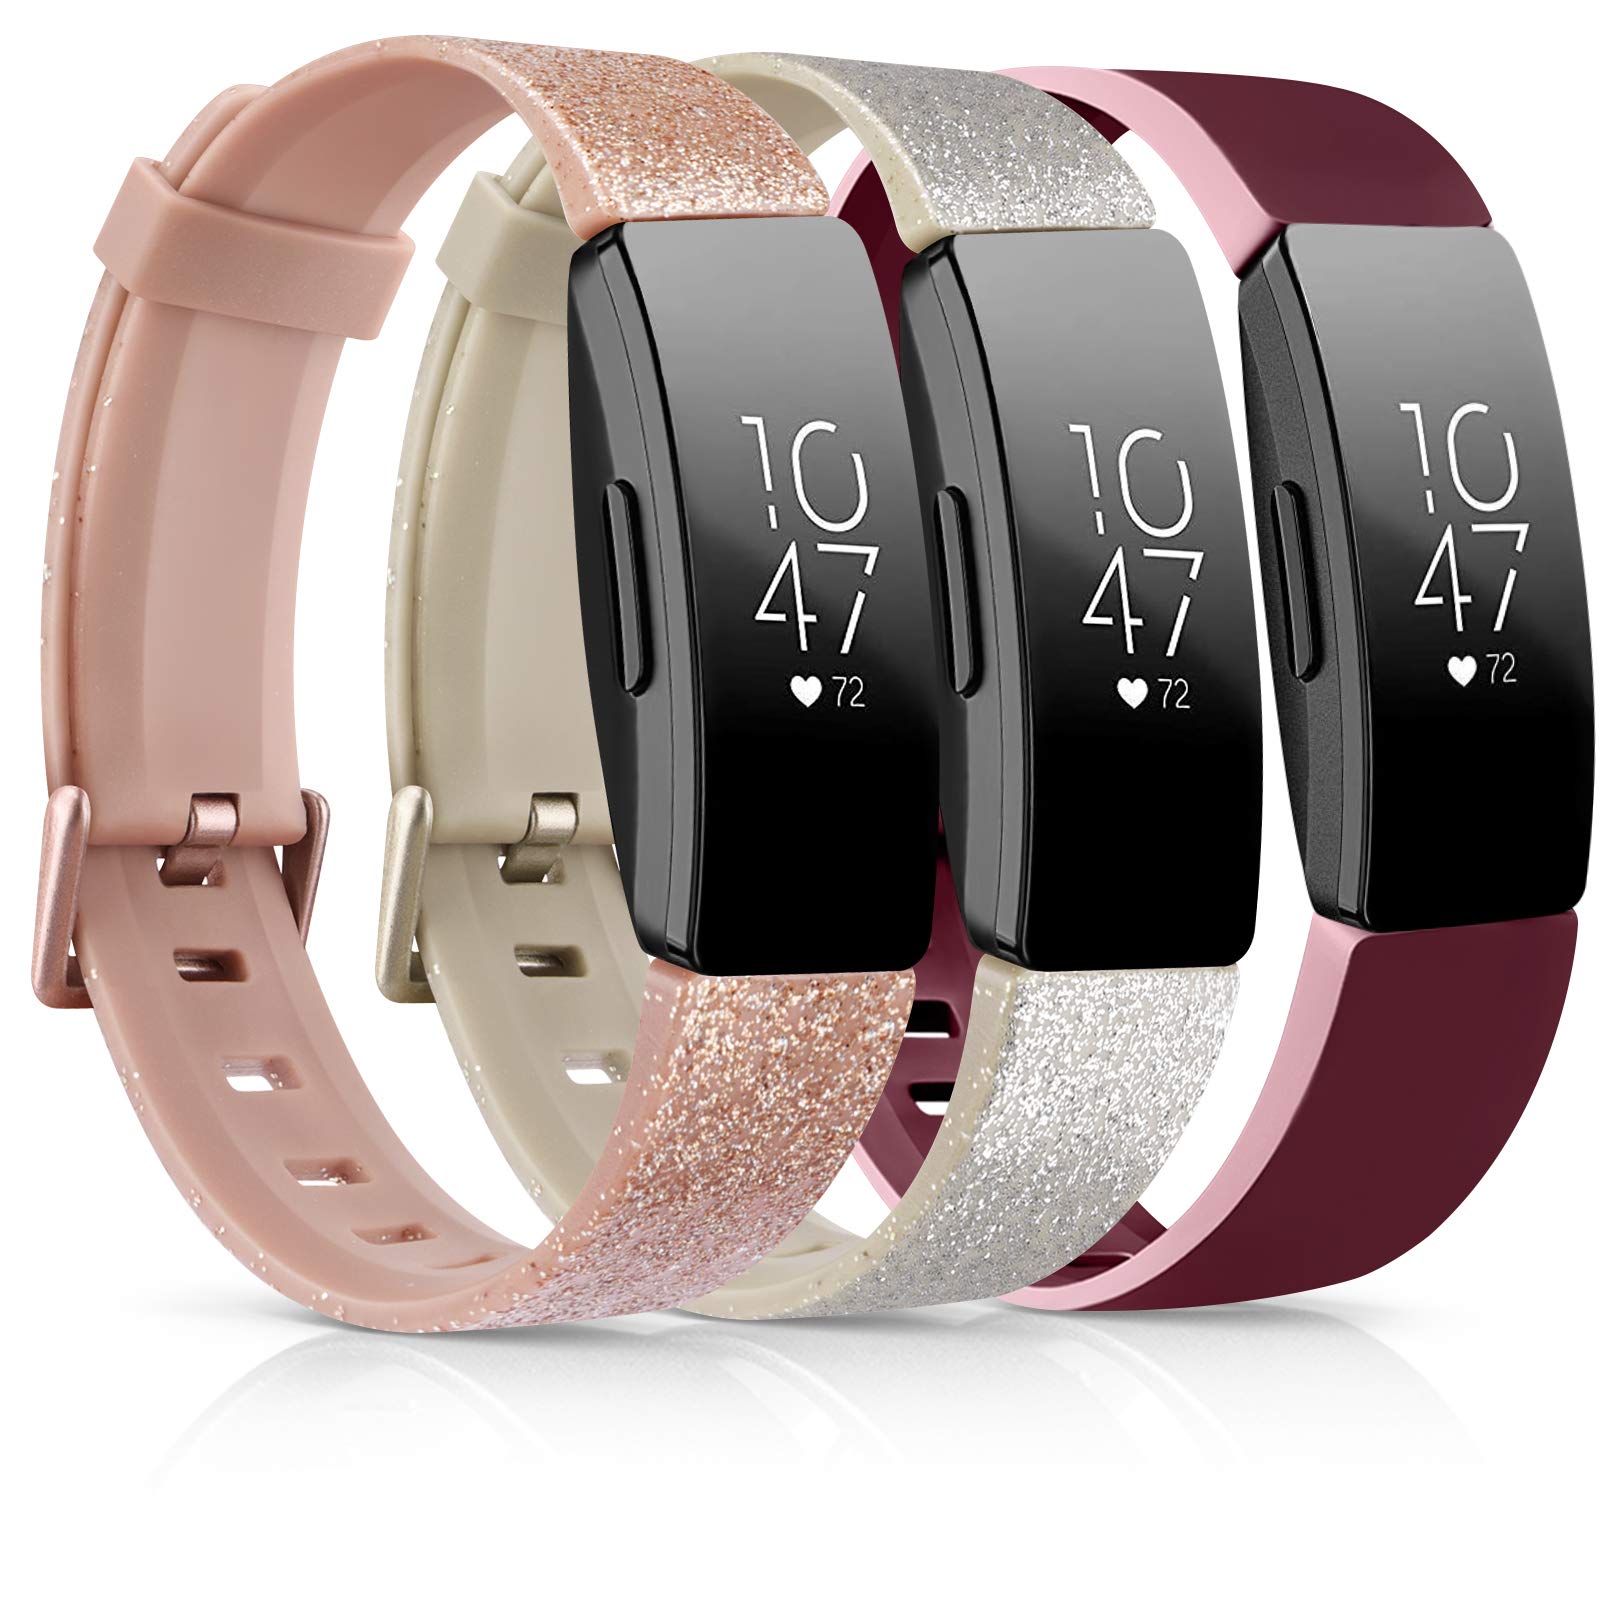 3 Pack] Soft TPU Bands Compatible with Fitbit Inspire 2/Inspire HR/Inspire/ Fitbit Ace 2 Sports Wristbands for Fitbit Inspire (Glistening Rose  Gold/Glistening Champagne Gold/Wine Red, Large) Large 09 Glistening Rose  Gold/G…